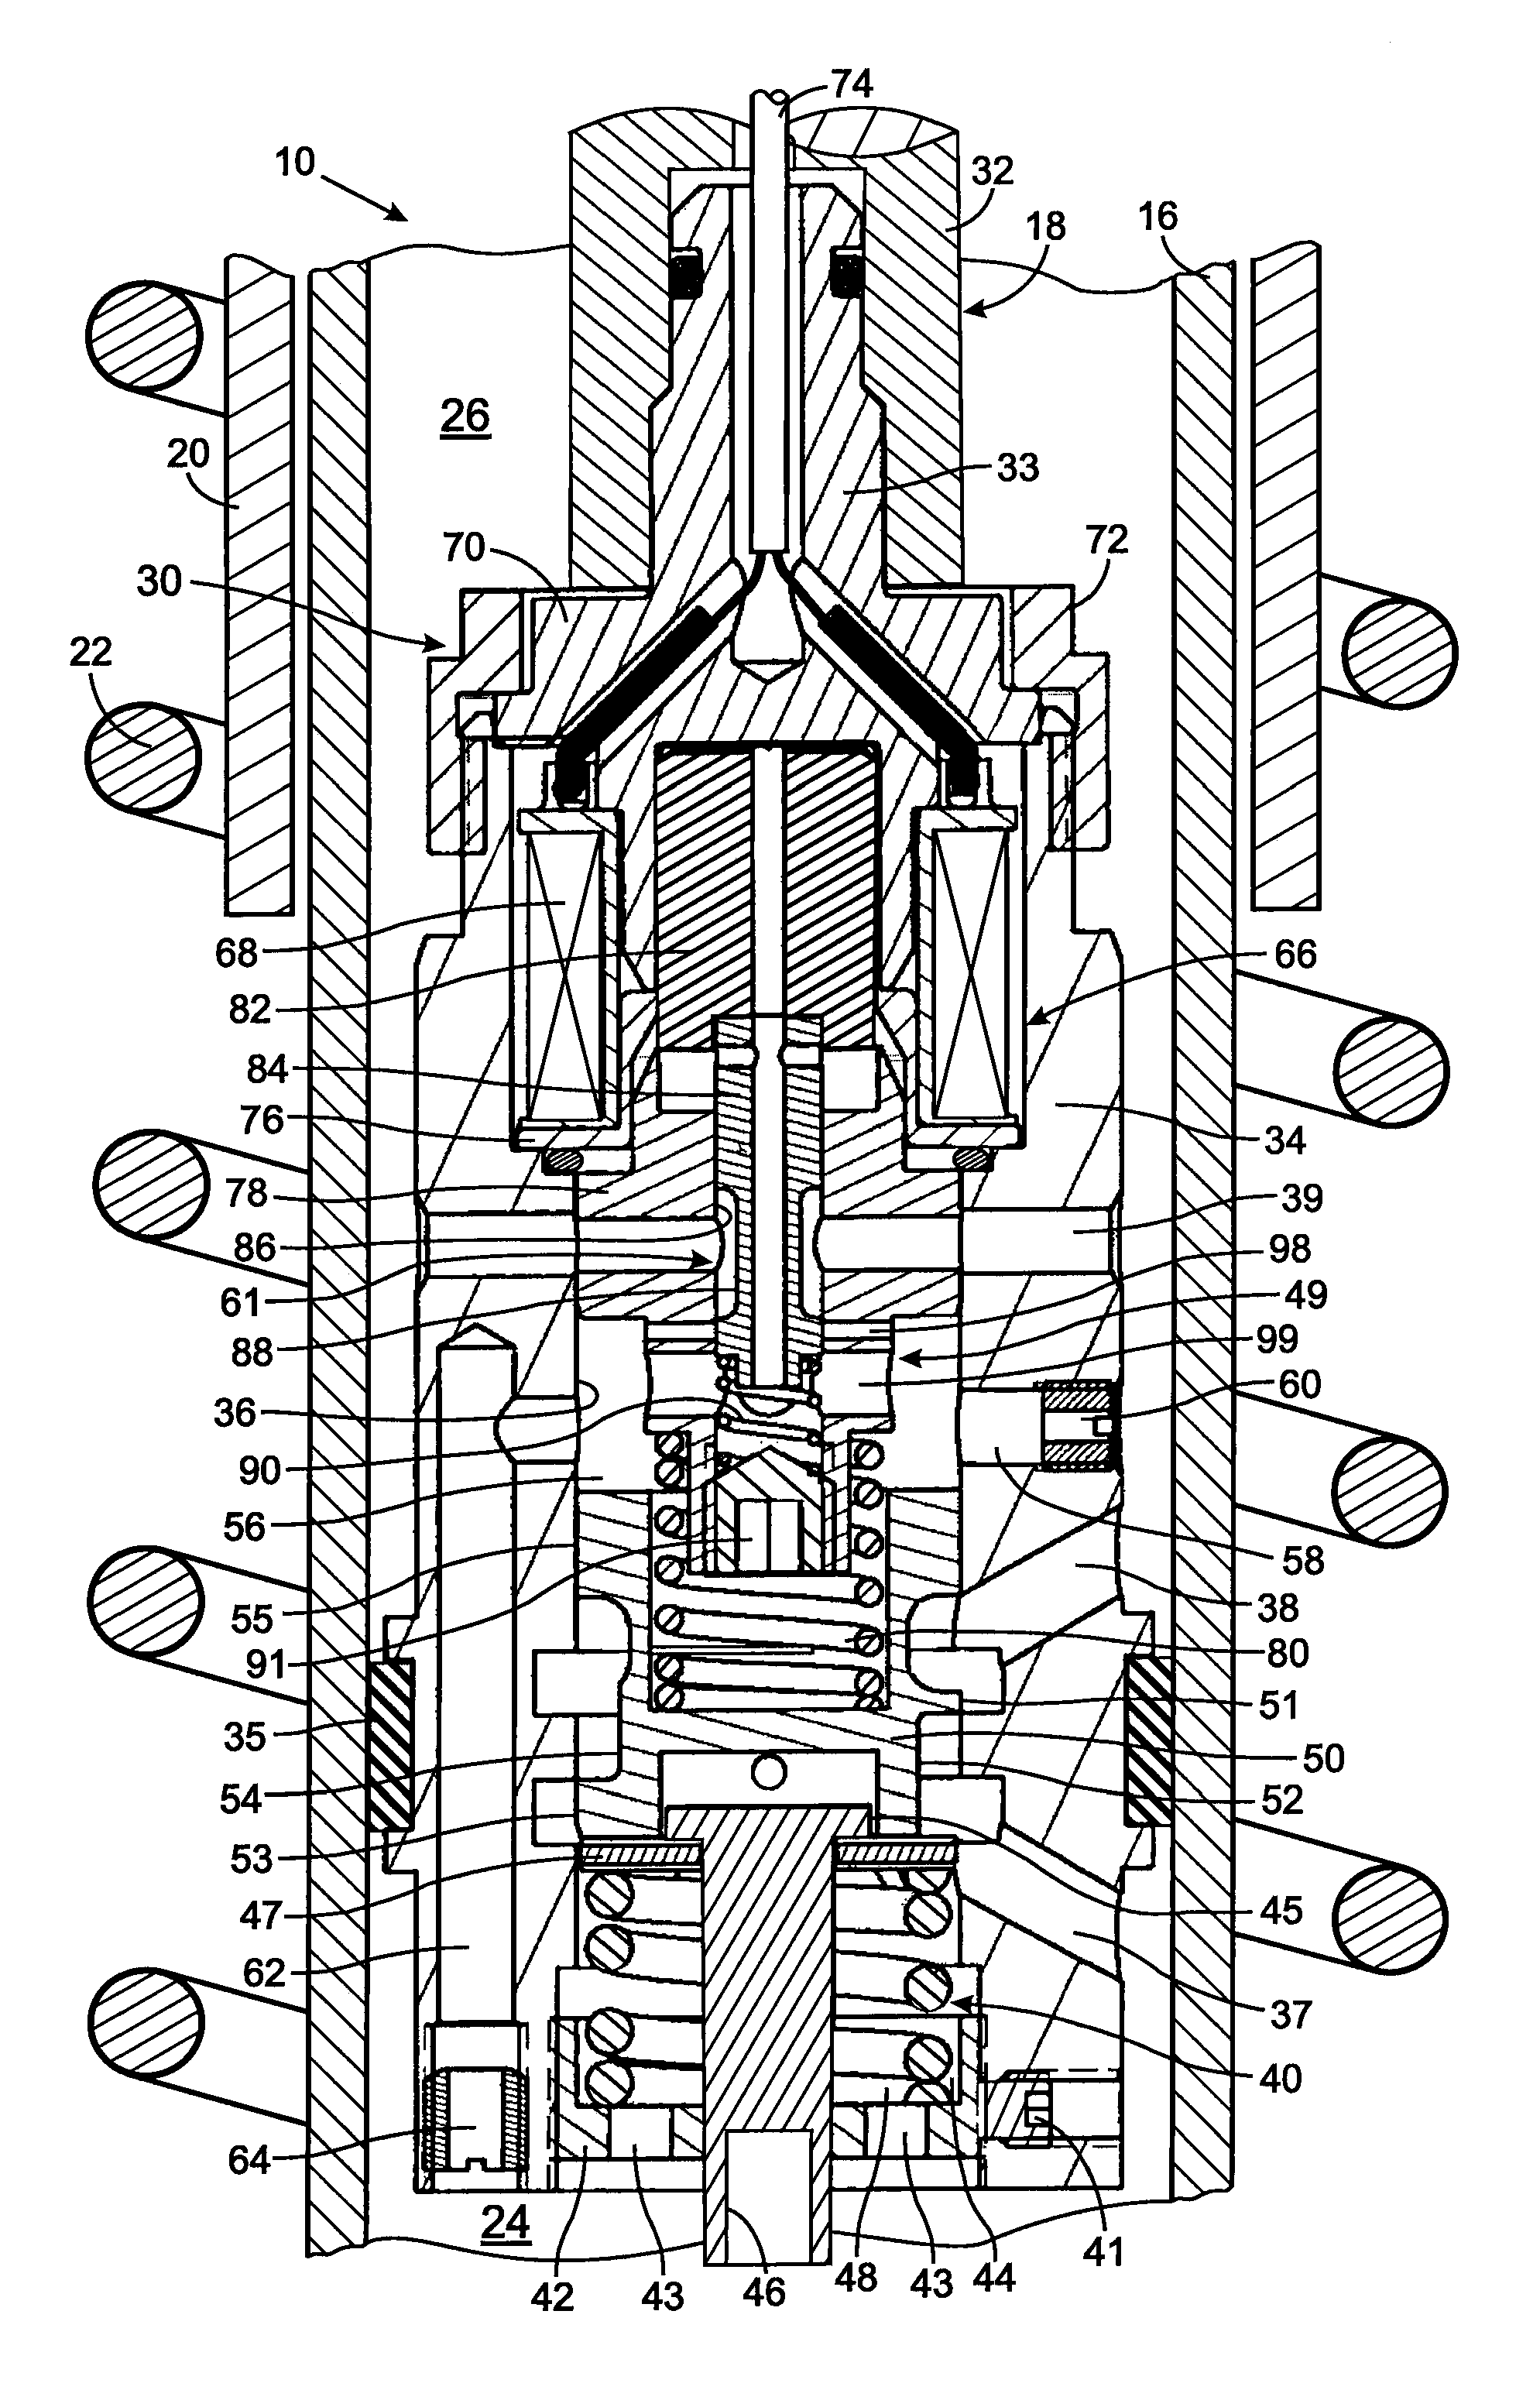 Hydraulic vibration damper piston with an integral electrically operated adjustment valve